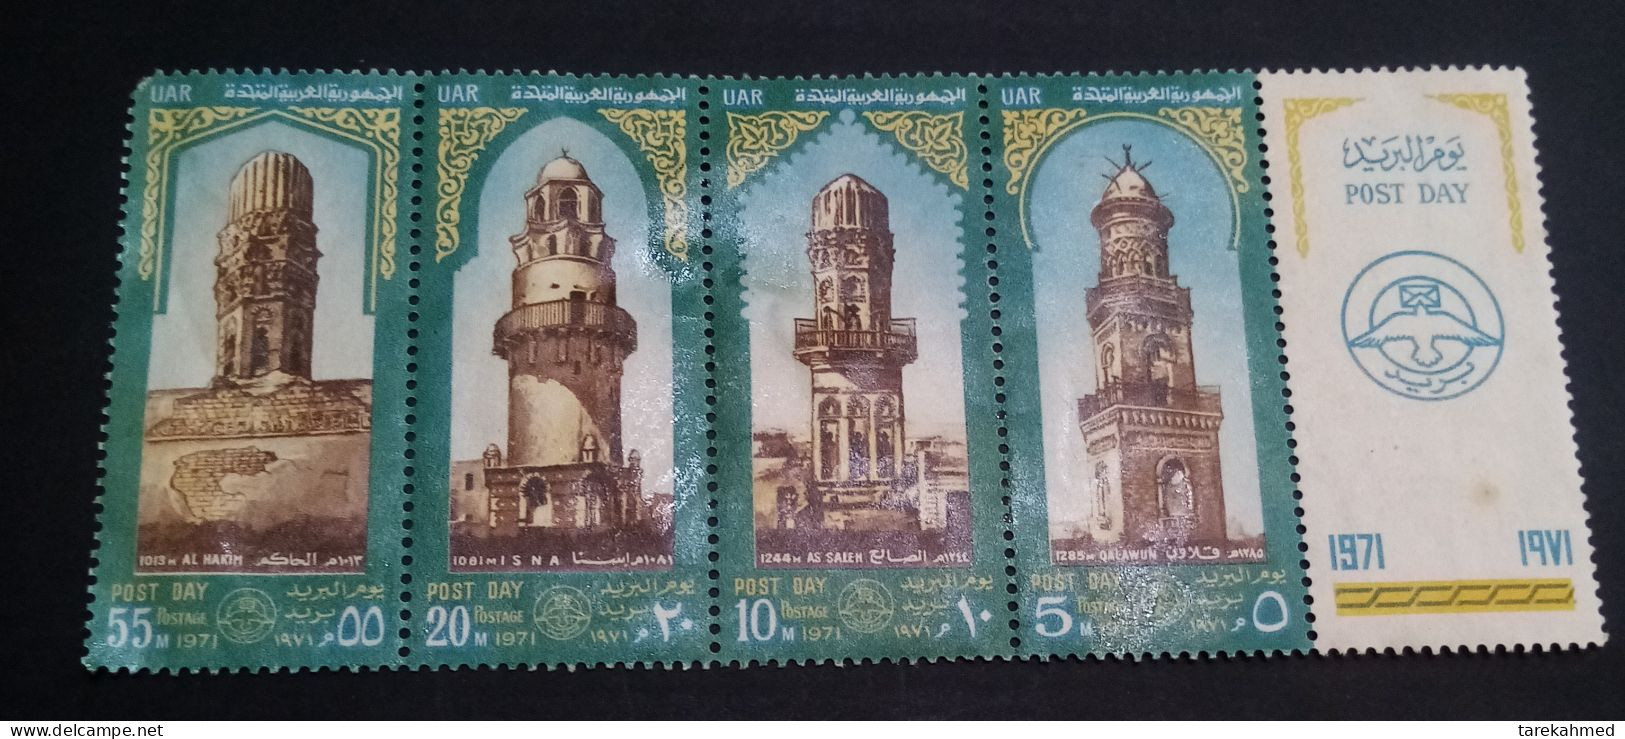 Egypt 1971 , Complete Mint SET Of The Post Day , Old Mosques Minarets , Sc 912-15 With Label . MH - Unused Stamps